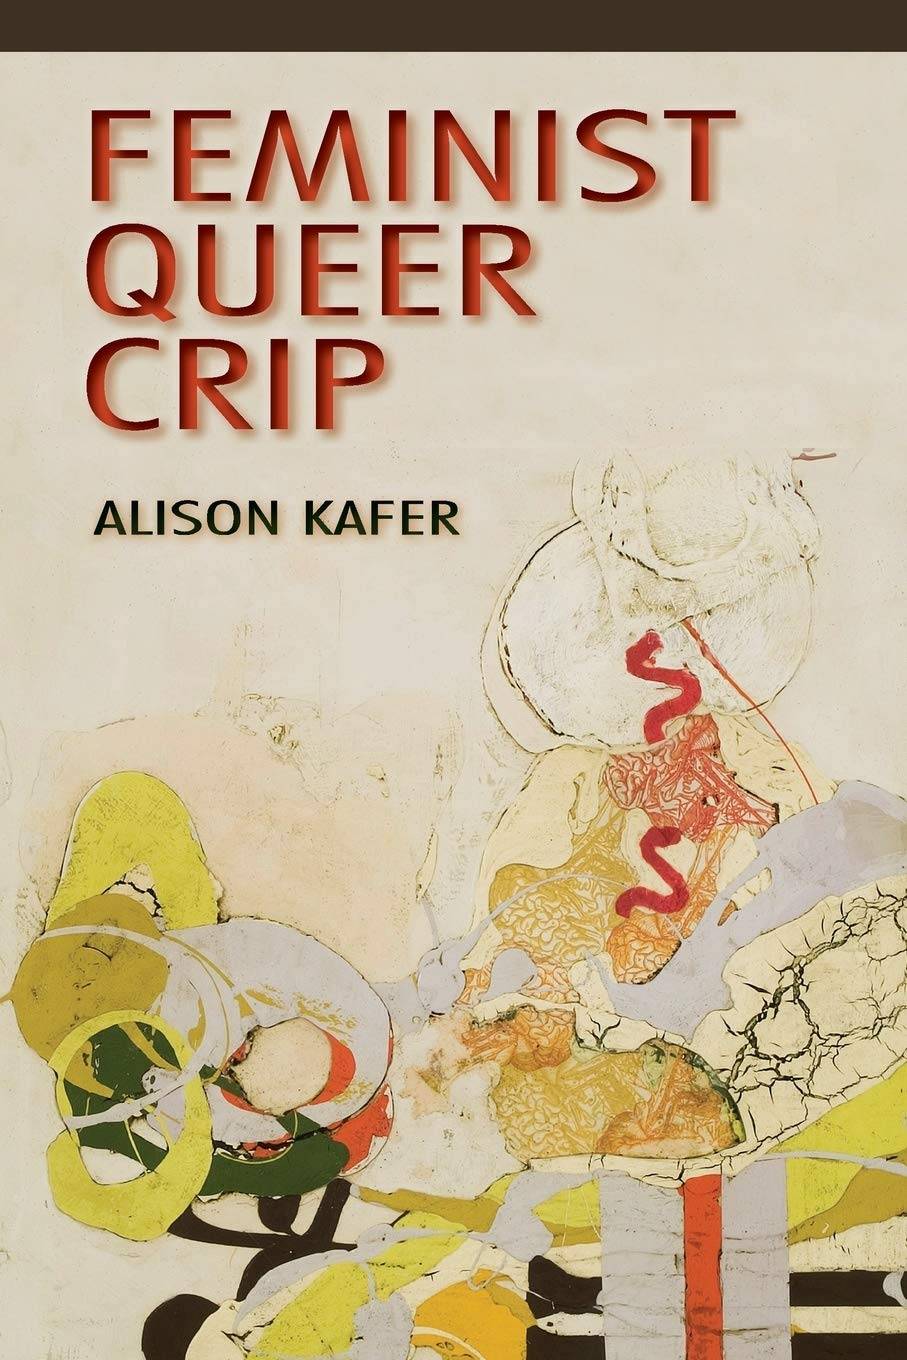 "Feminist, Queer, Crip" book cover featuring an abstract organic illustration.